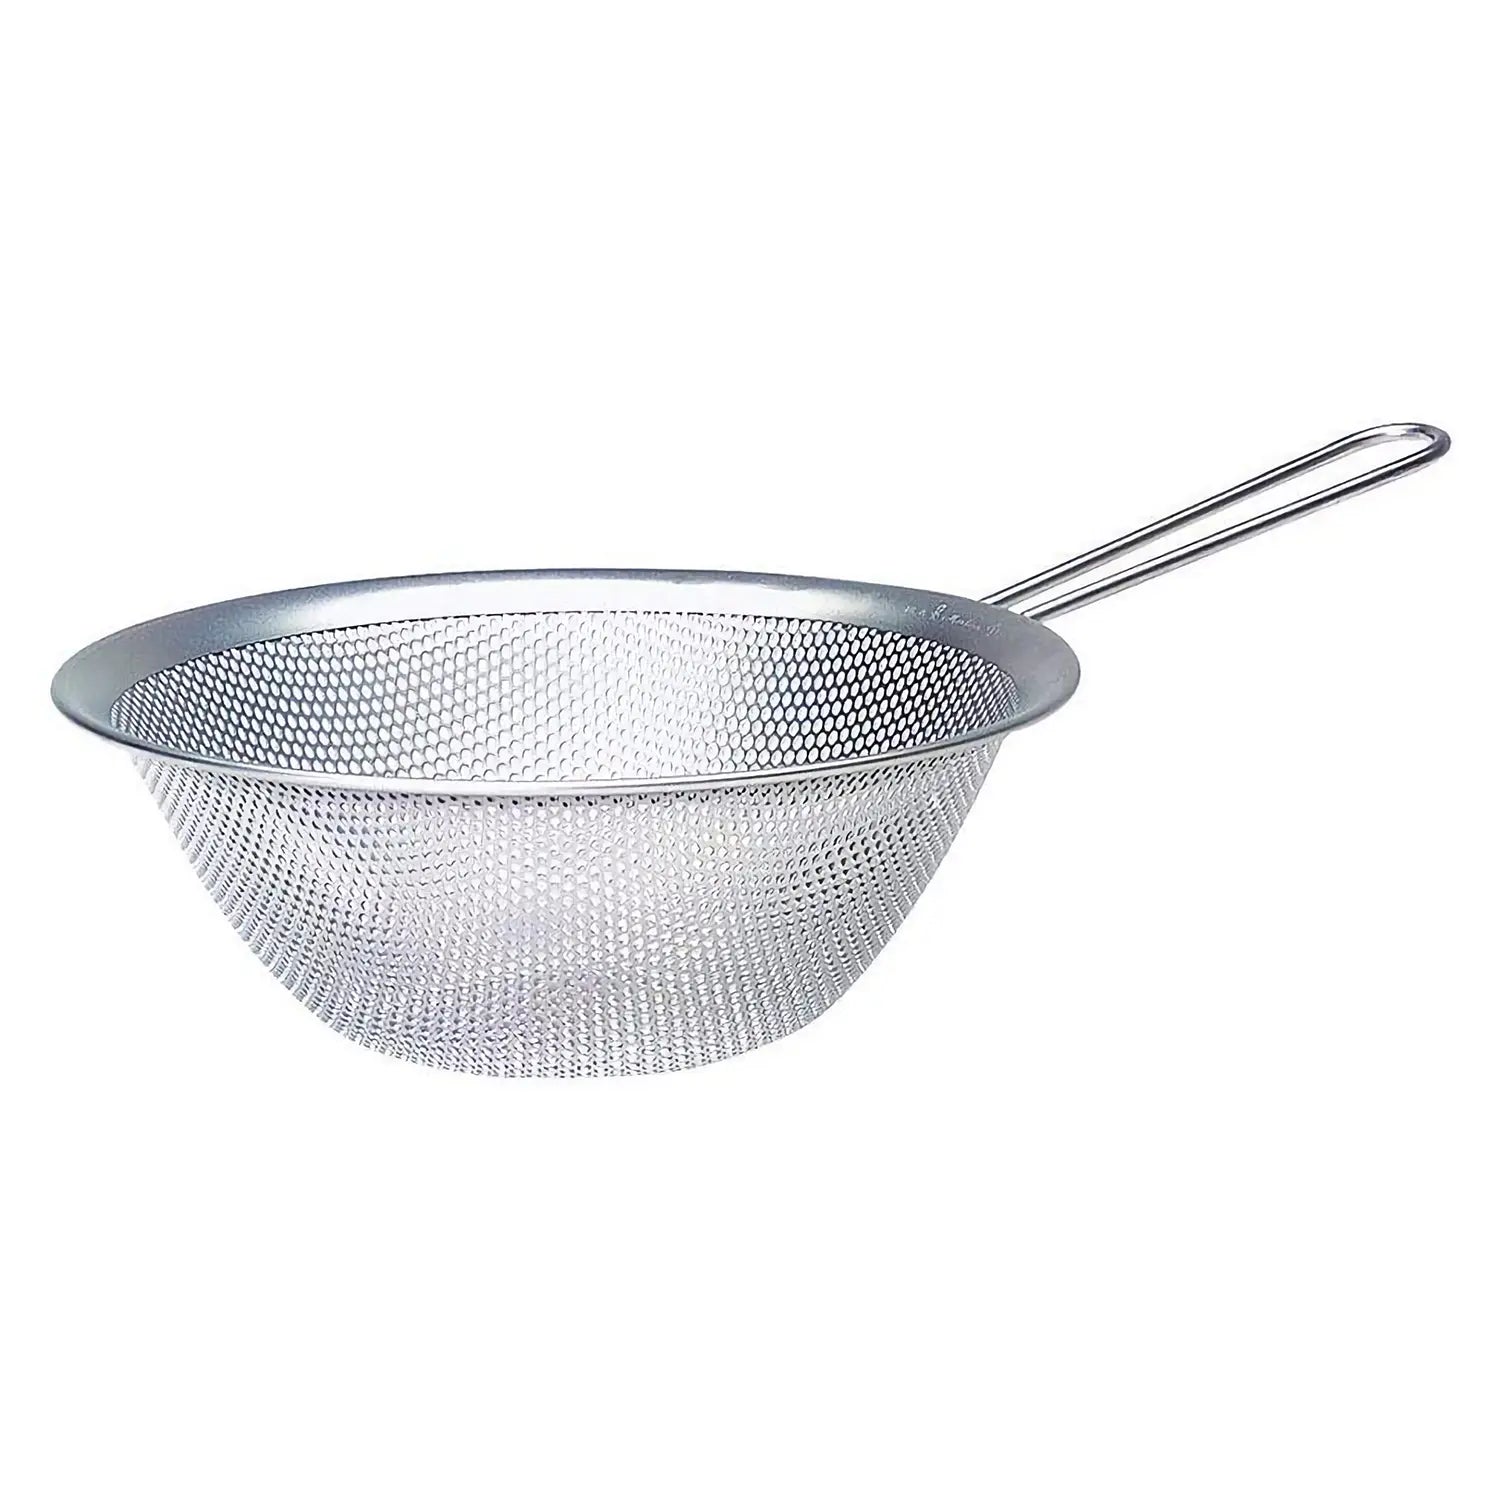 EBM Stainless Steel Perforated Ice Scoop - Globalkitchen Japan